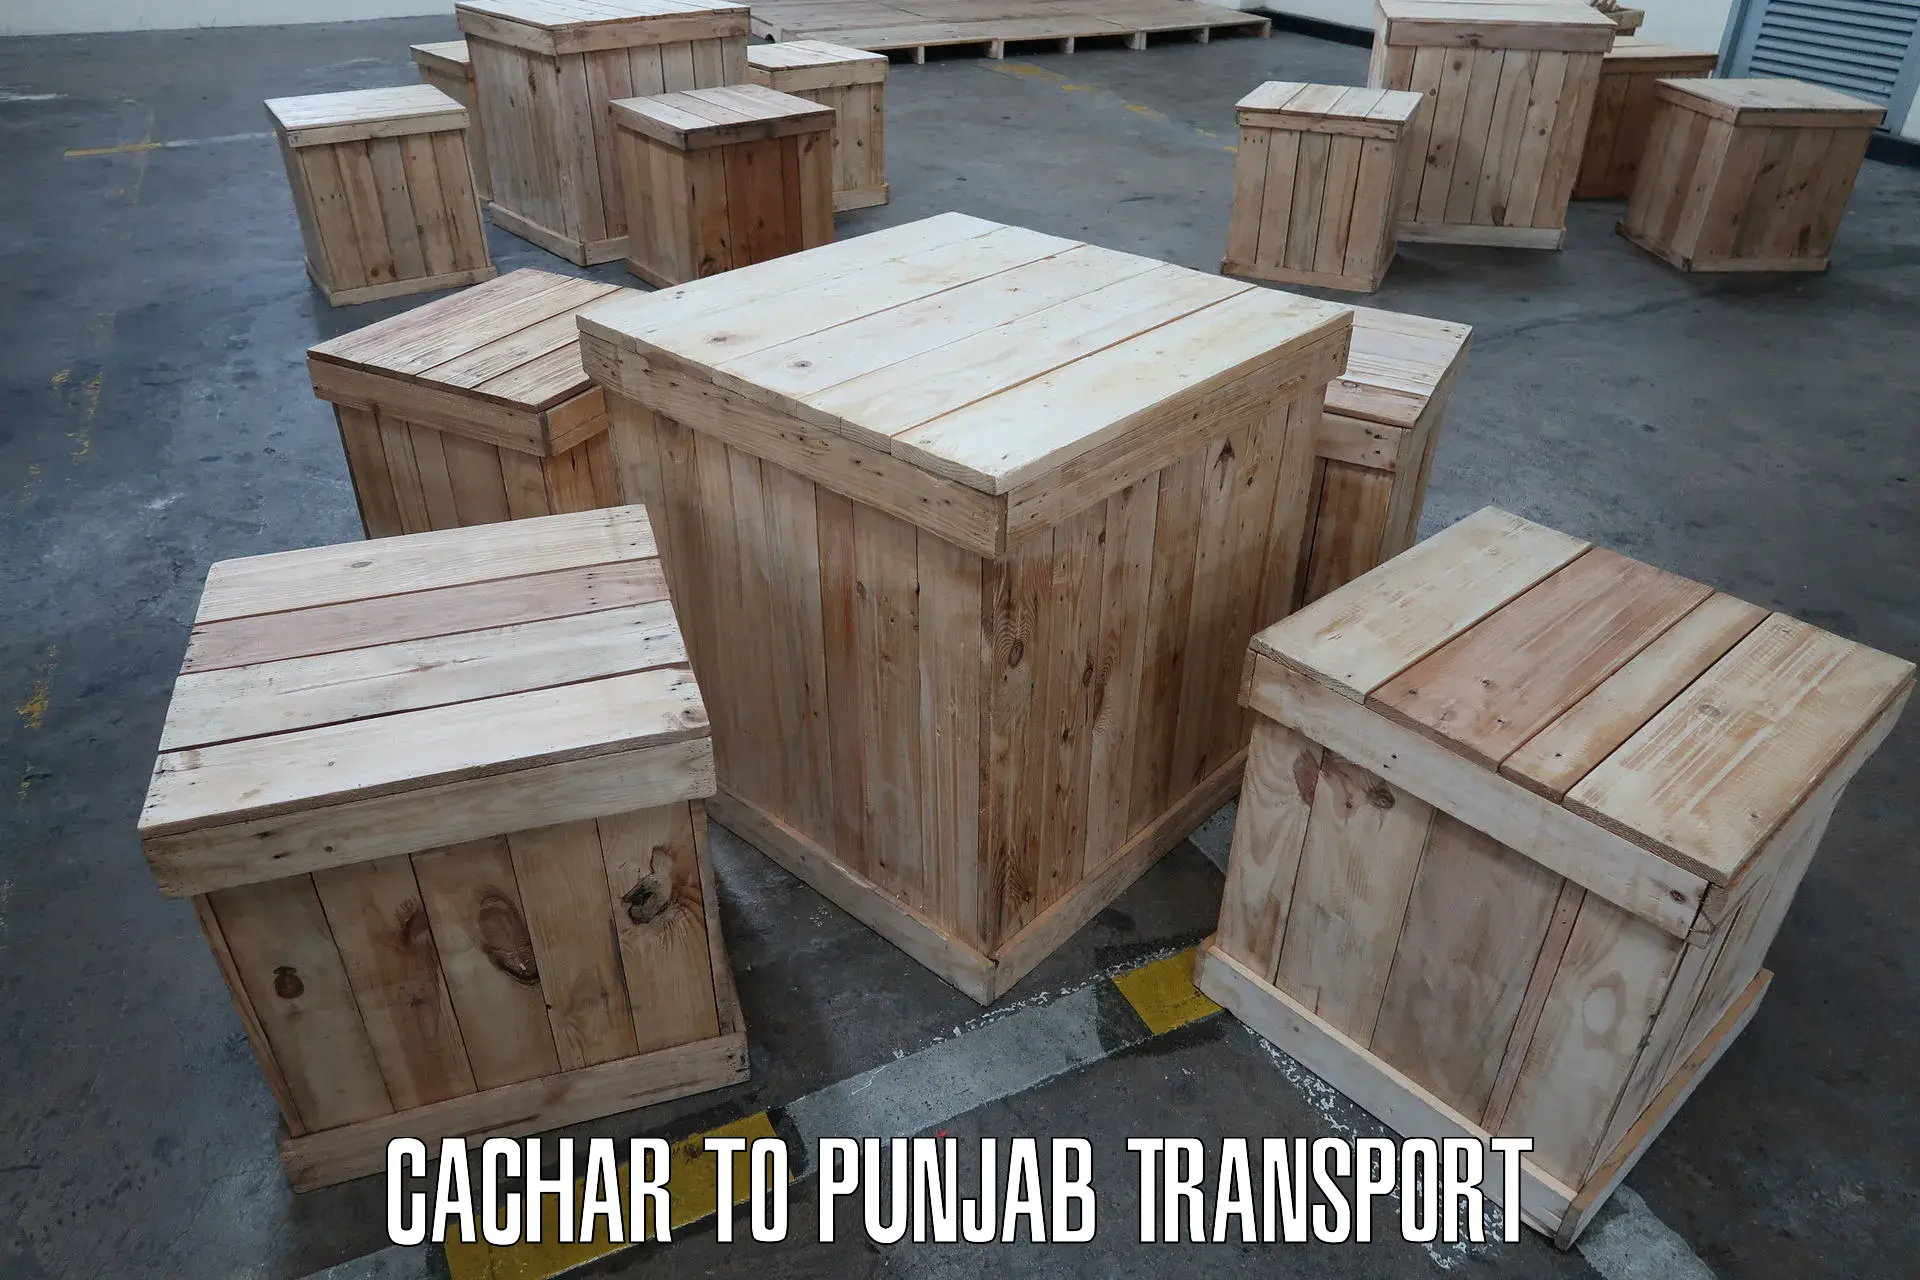 Container transport service Cachar to Moga